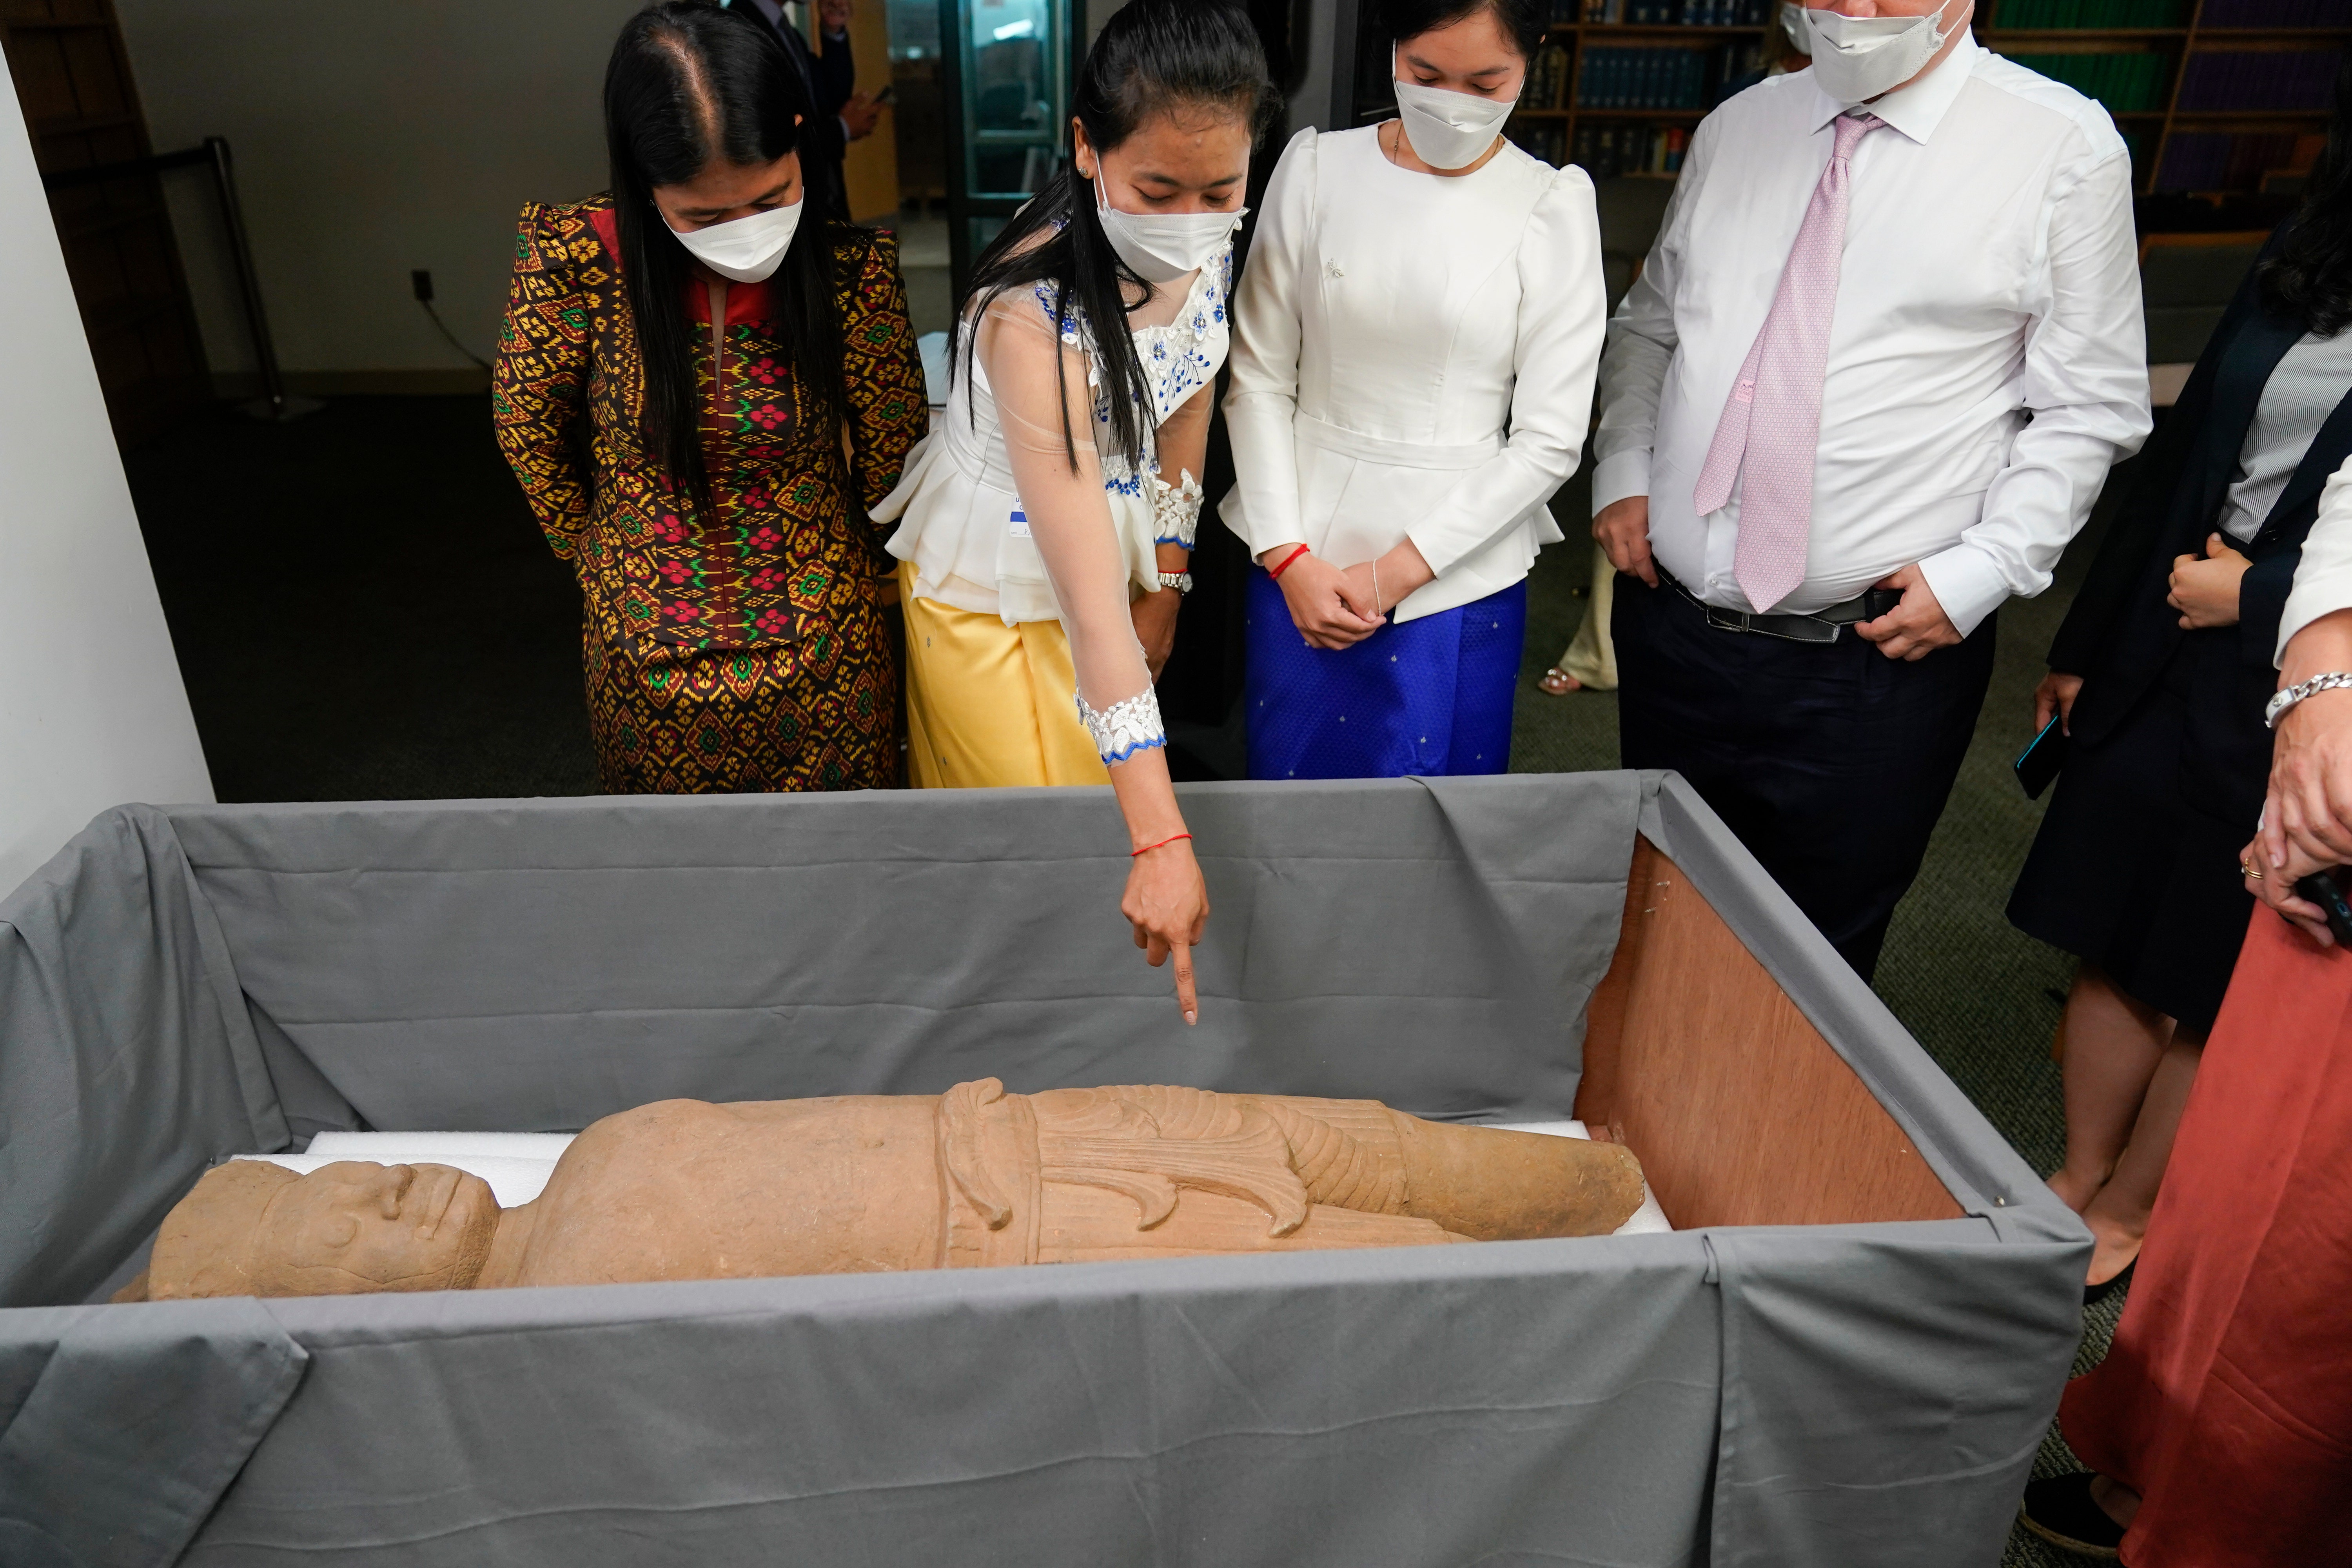 US officials return Cambodian artefacts looted during the Khmer Rouge era